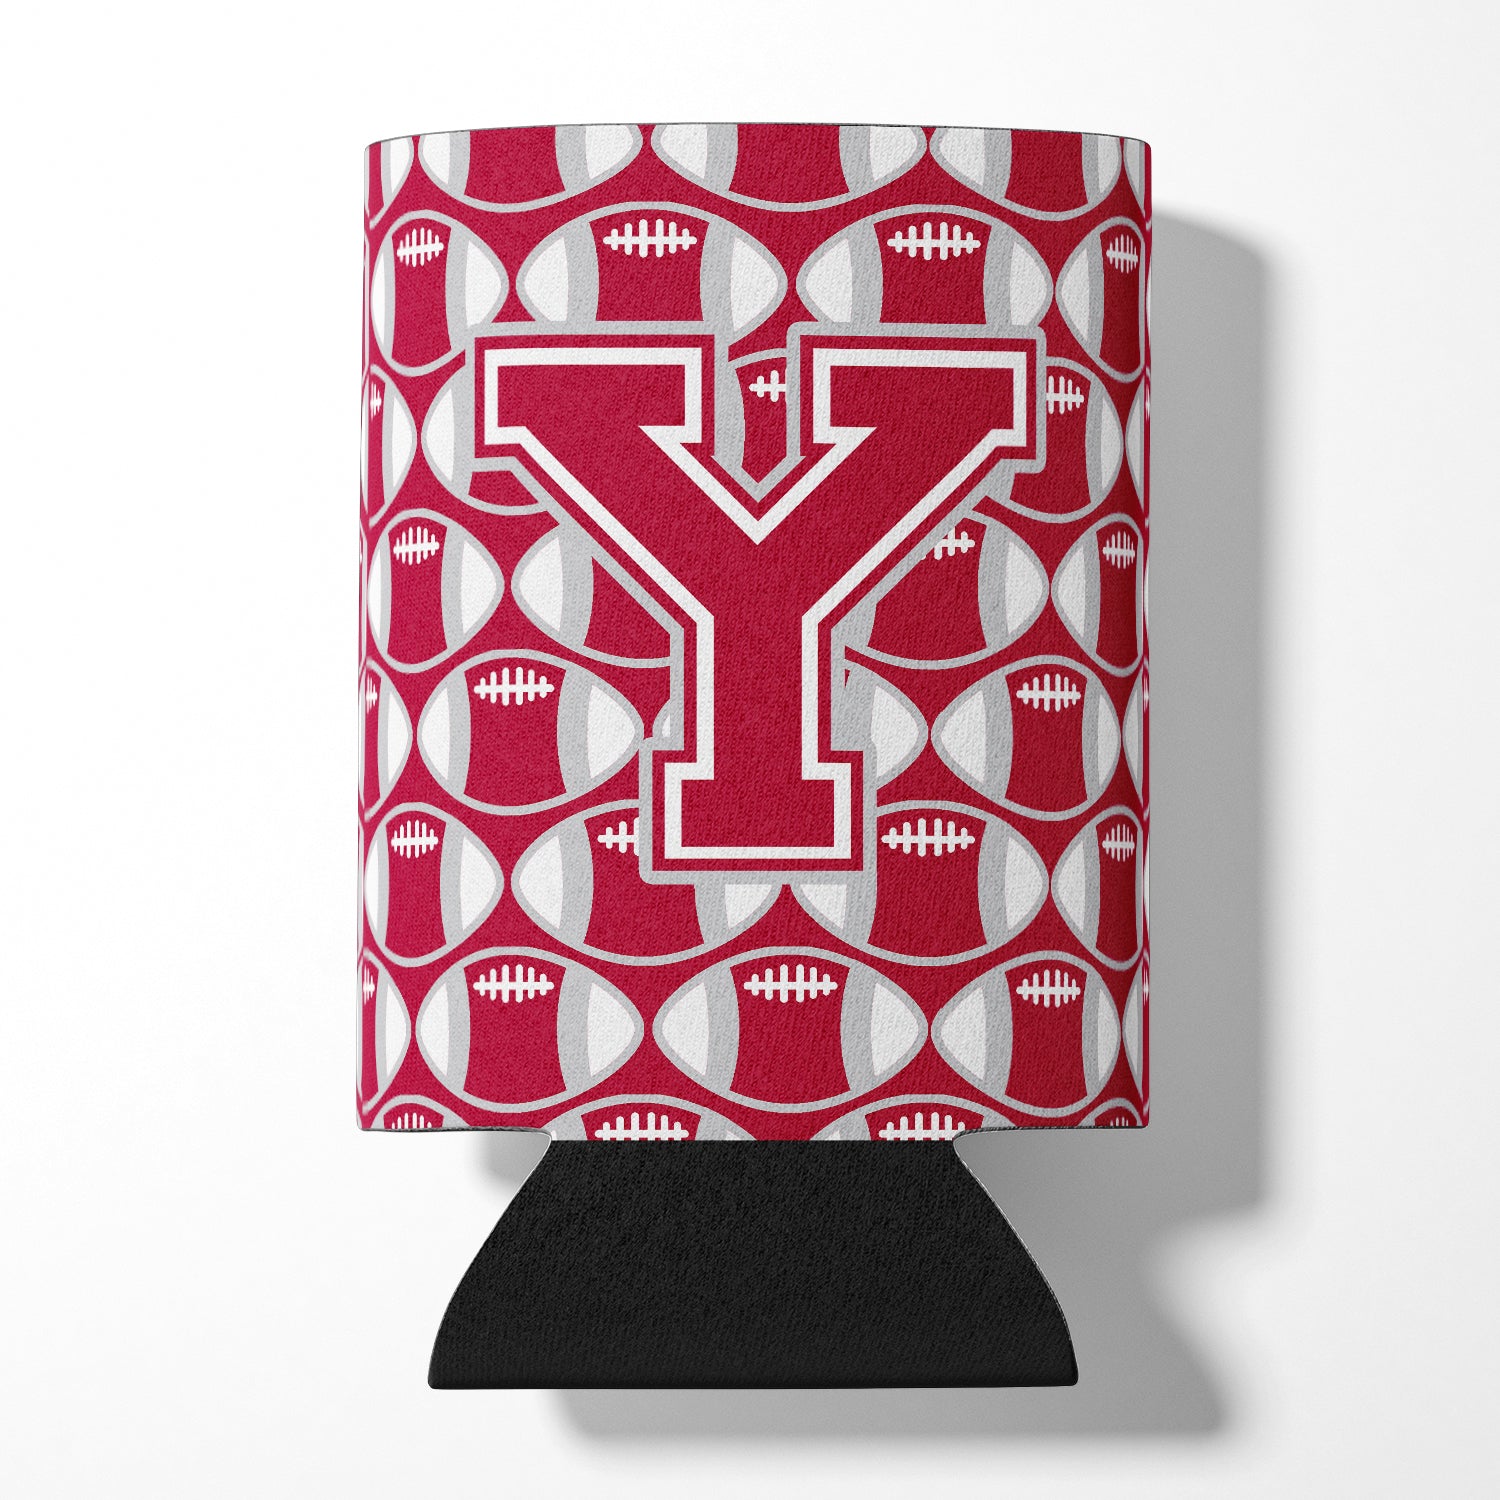 Letter Y Football Crimson, grey and white Can or Bottle Hugger CJ1065-YCC.